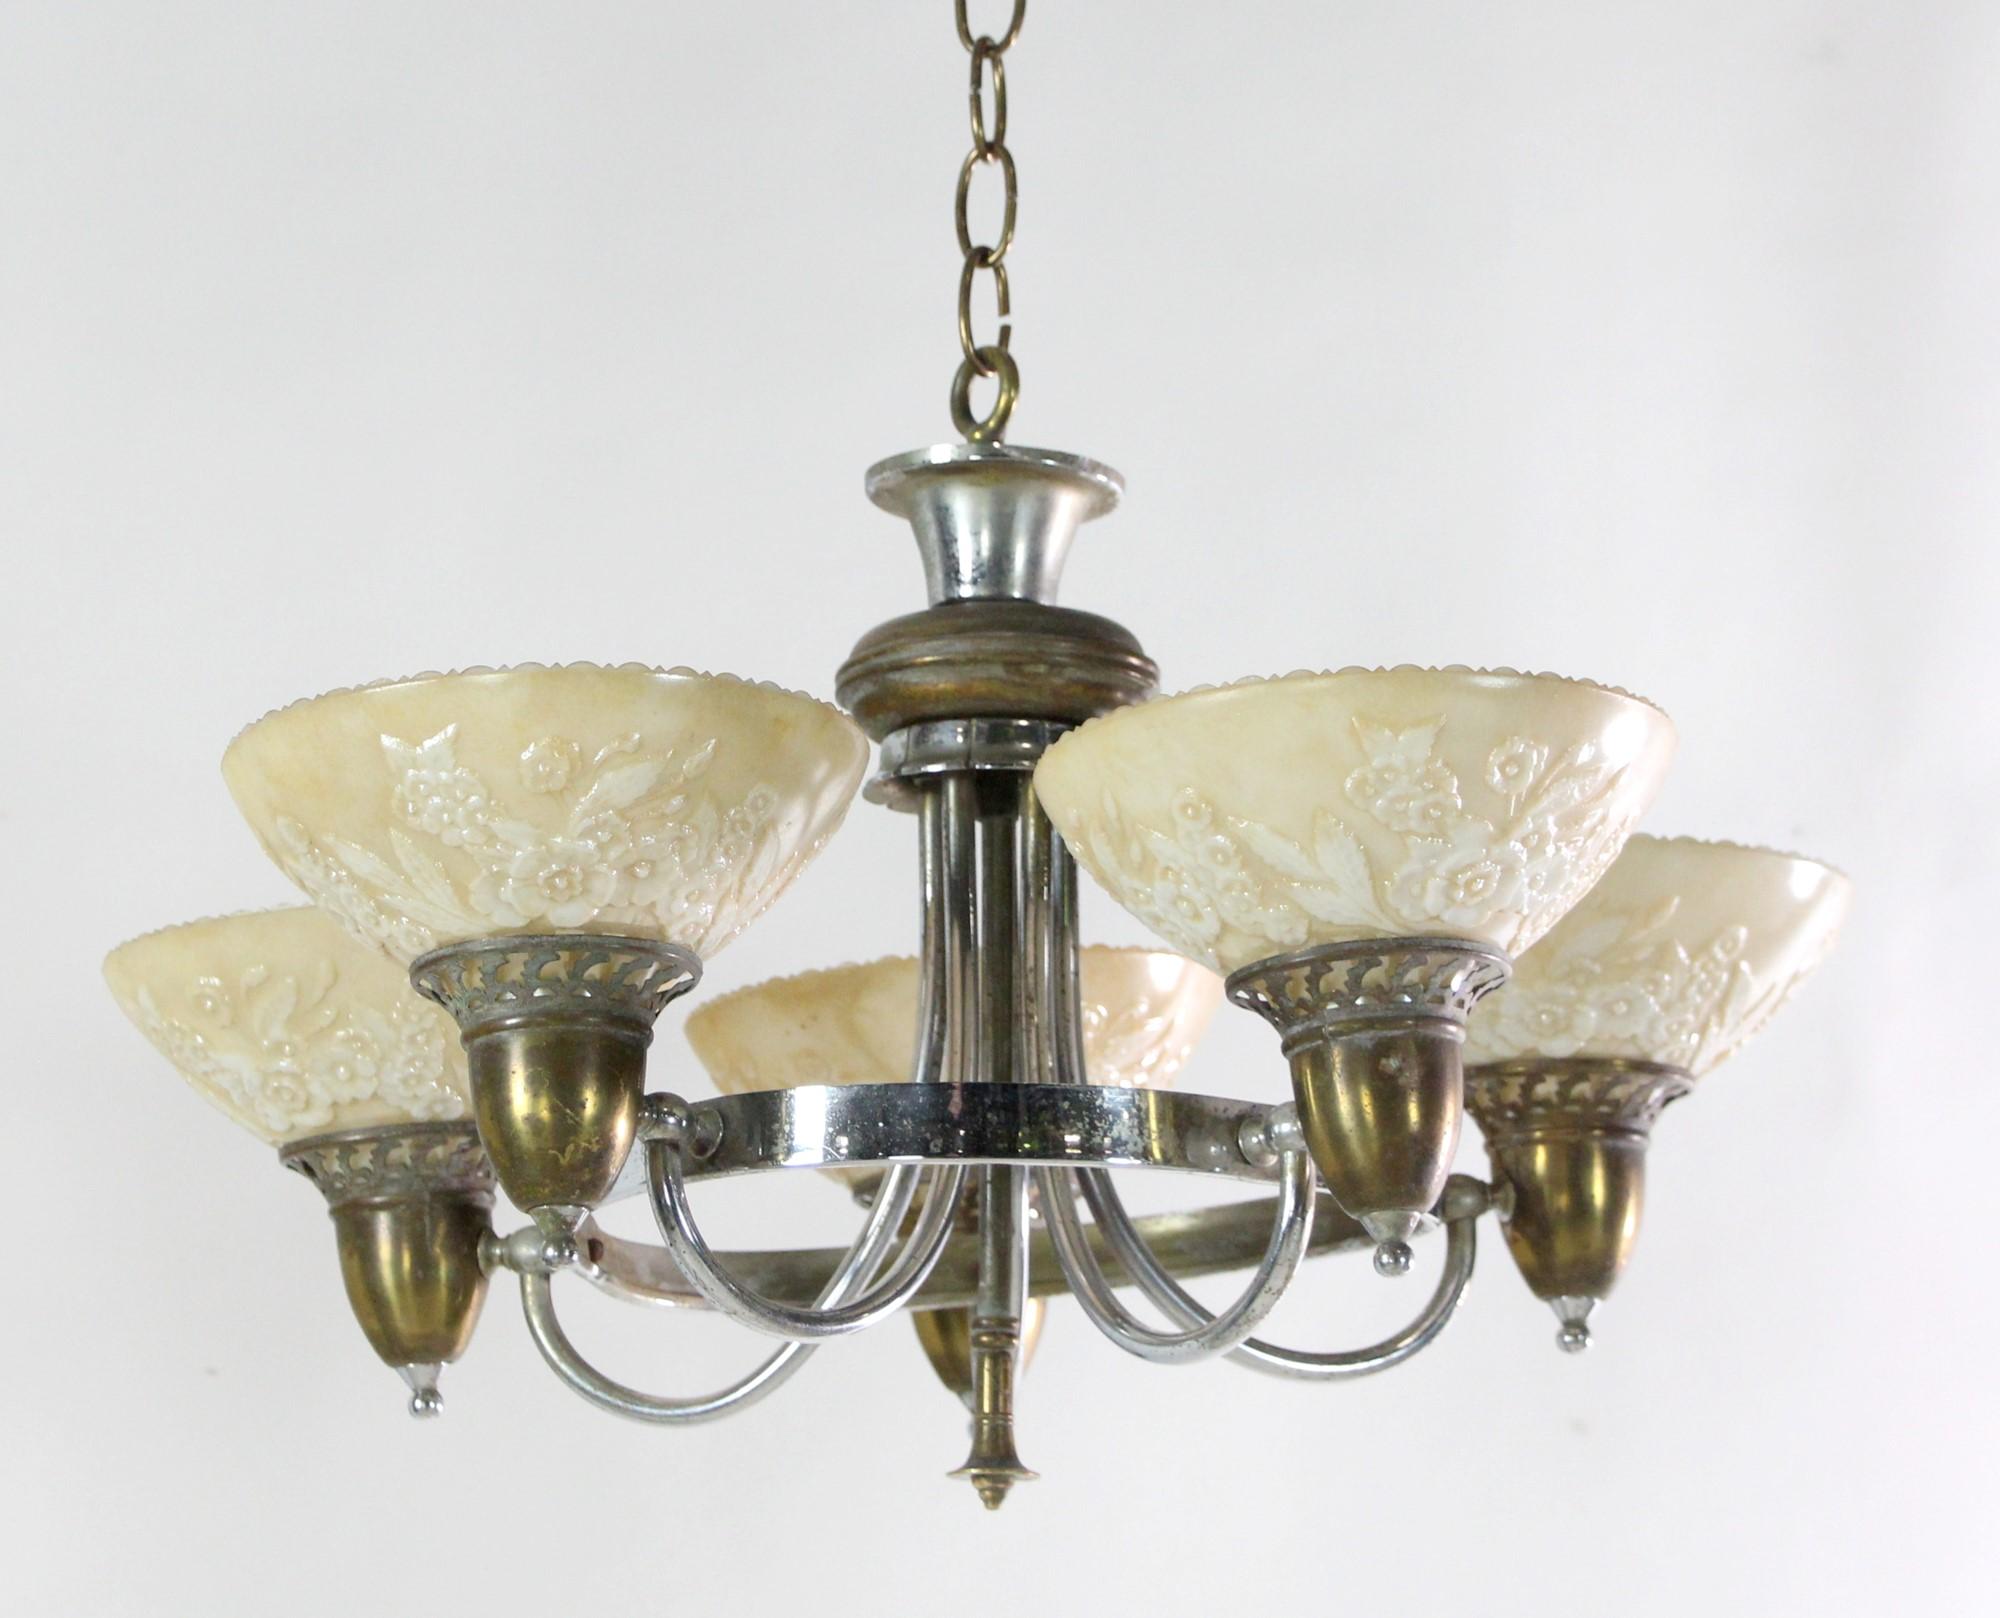 Mid-20th Century Nickel Brass Art Deco 5 Light Chandelier Floral Glass Shades For Sale